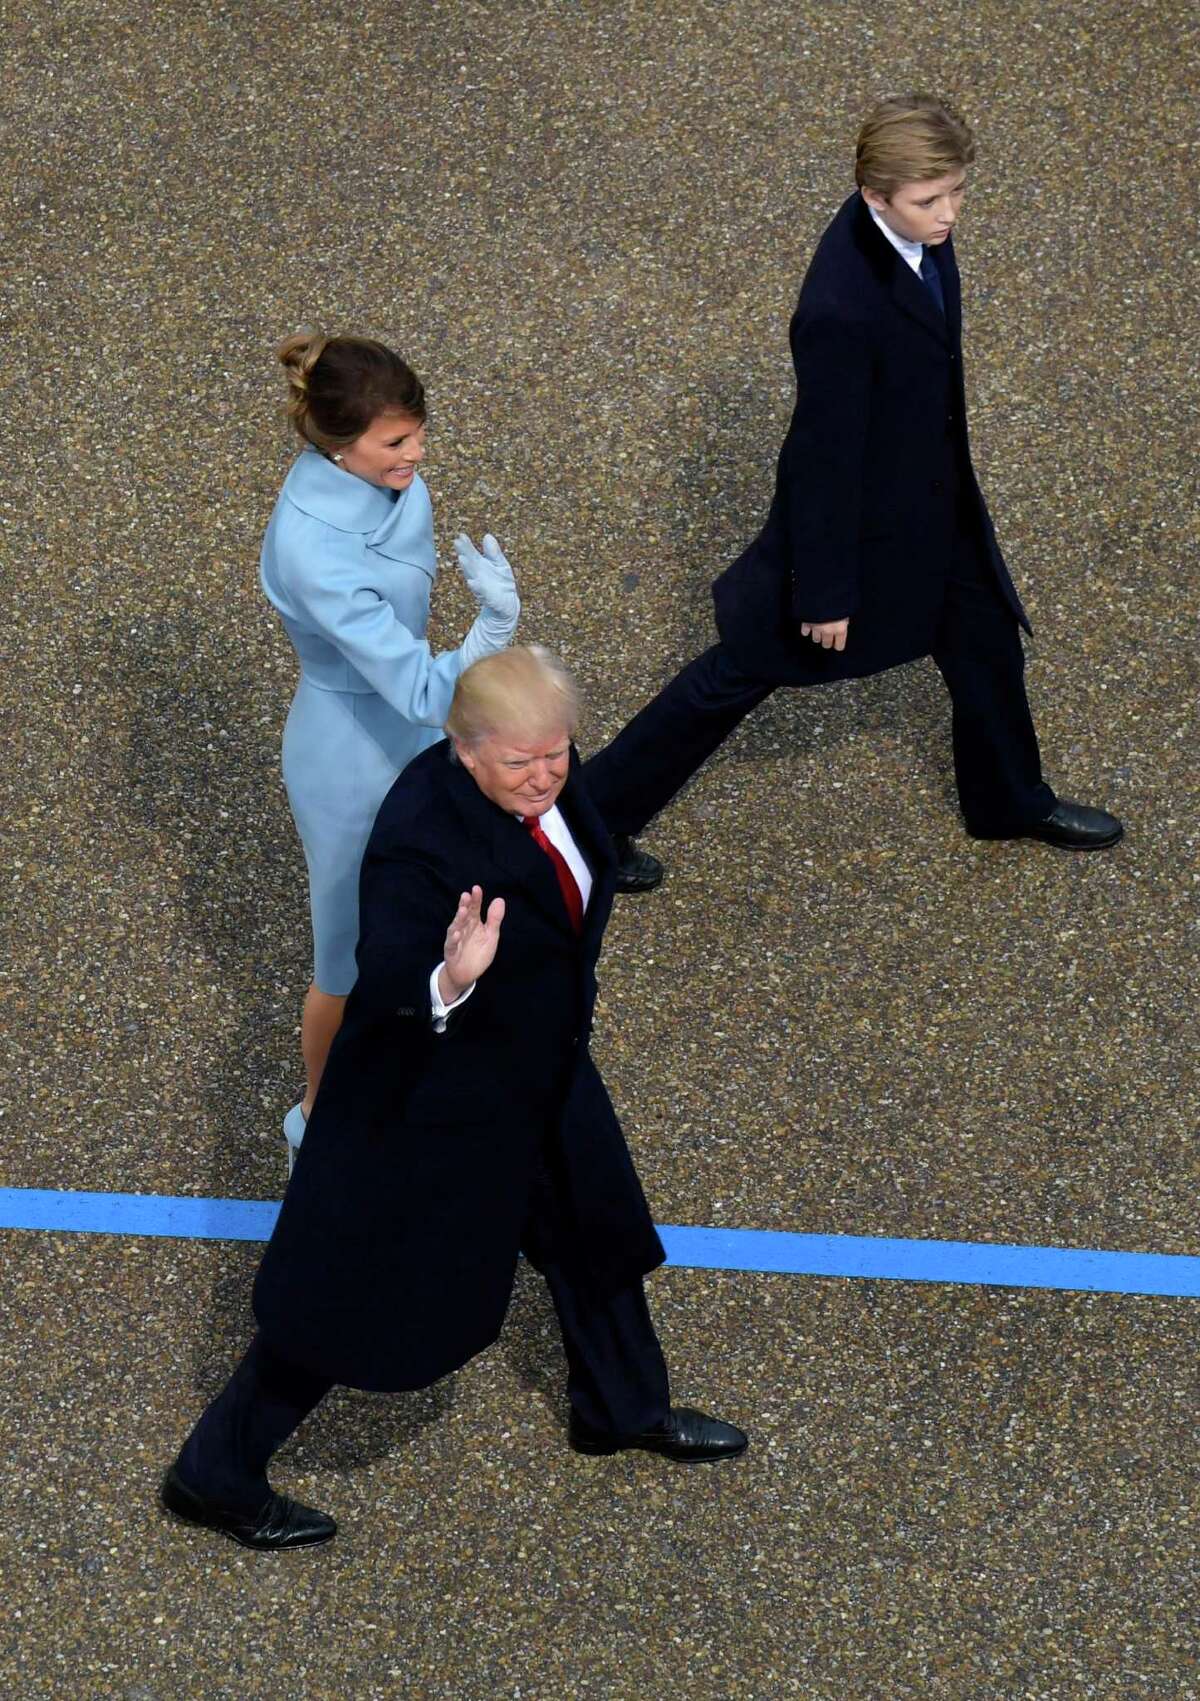 President Donald Trump waves as he walks with first lady Melania Trump and their son Barron during the 58th Presidential Inauguration parade for President Donald Trump in Washington. Friday, Jan. 20, 2017. (AP Photo/Susan Walsh)